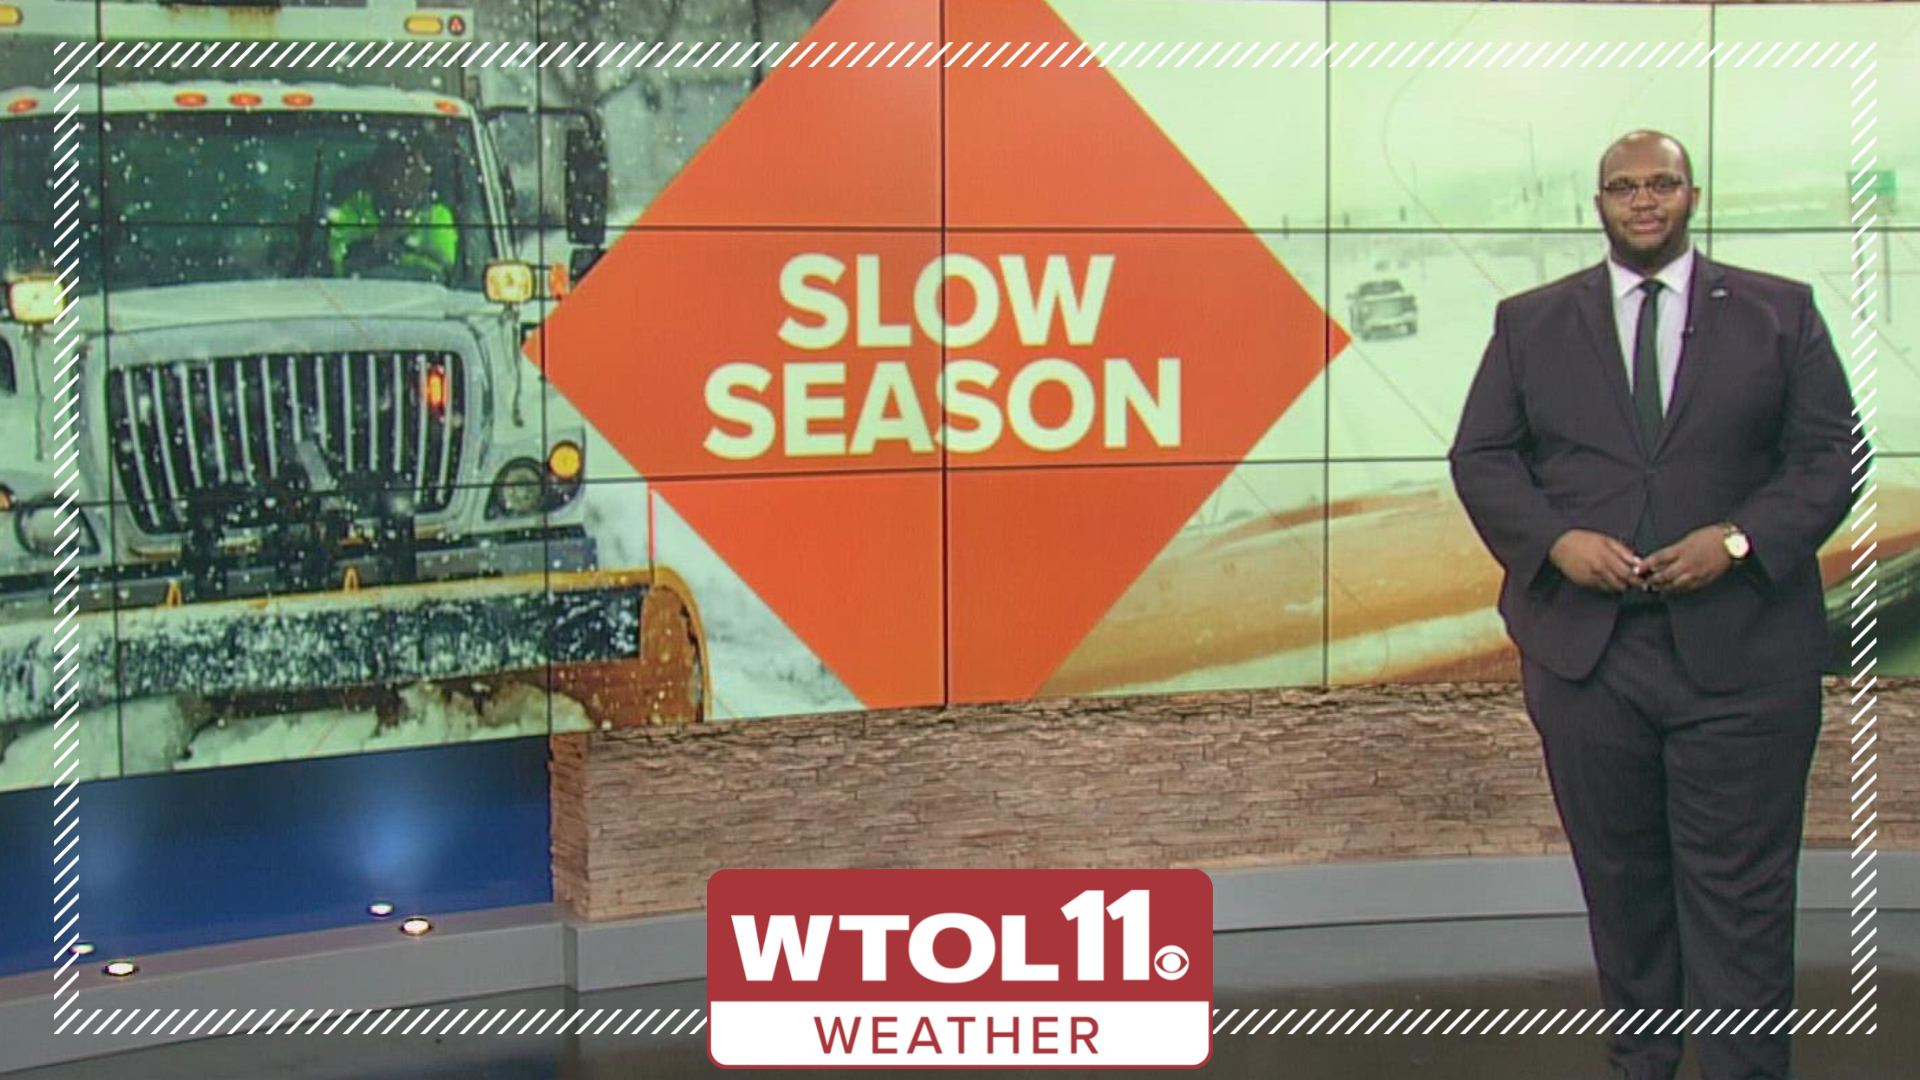 For some, the lack of snow may be a welcome relief. But for the industry that relieves our stress when it snows, it's been pretty slow with plows parked in our area.